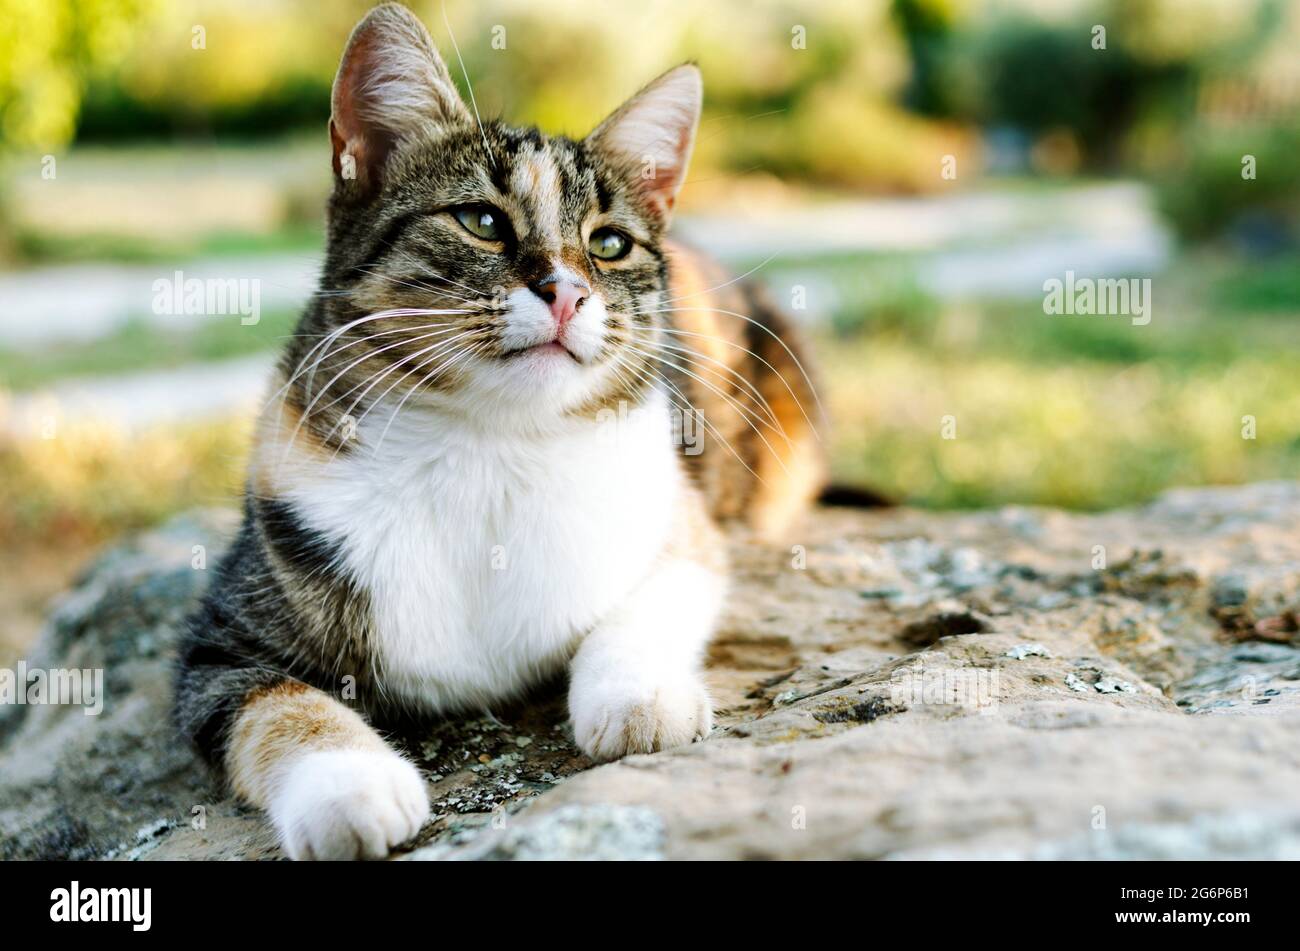 Front view of a lying calico cat outdoors Stock Photo